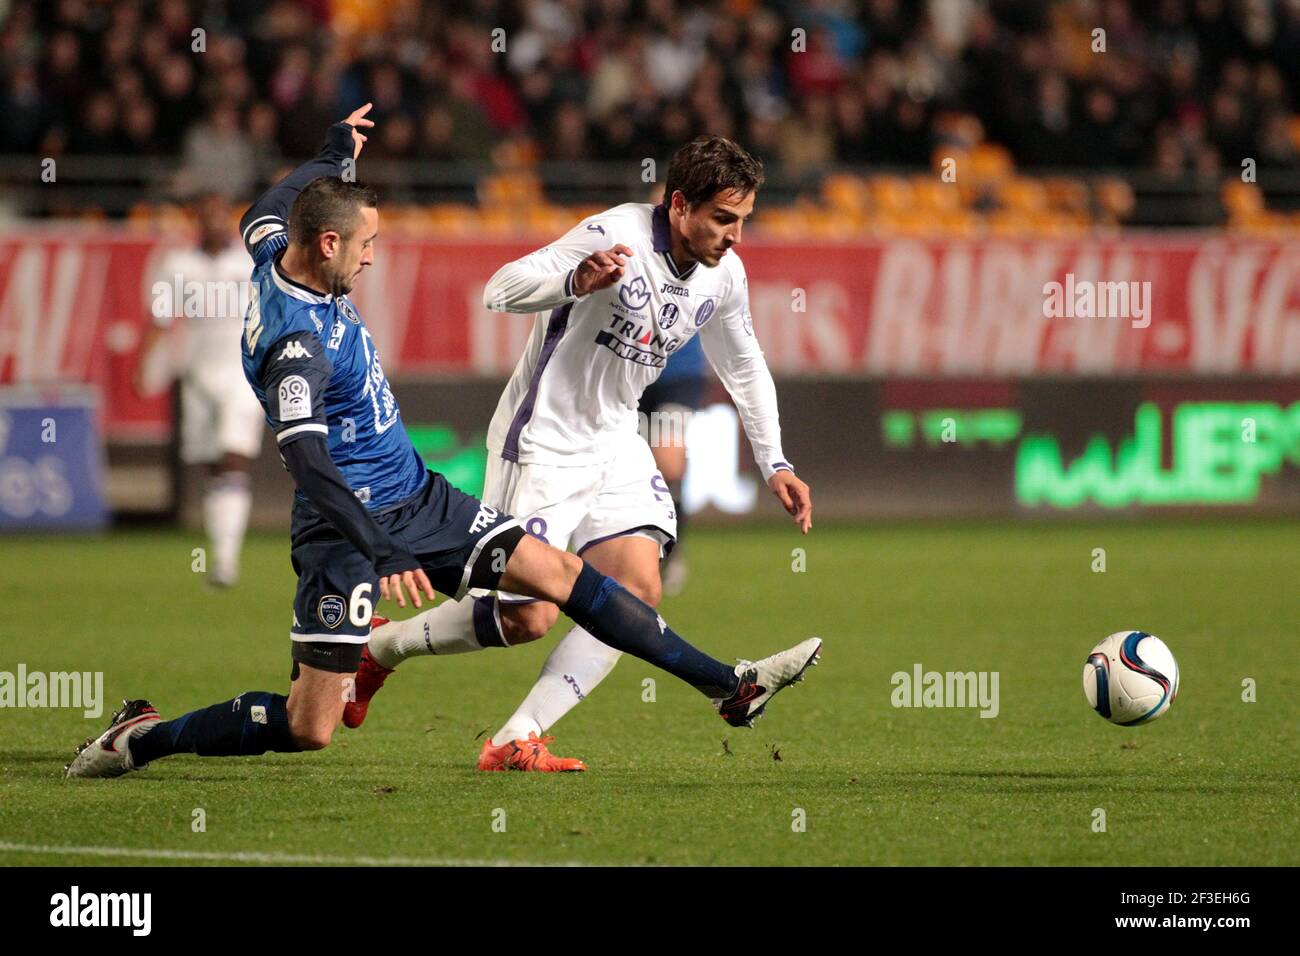 Jonathan Martins Pereira (Troyes), Oscar Trejo (Toulouse) during the French  L1 football match between ESTAC Troyes